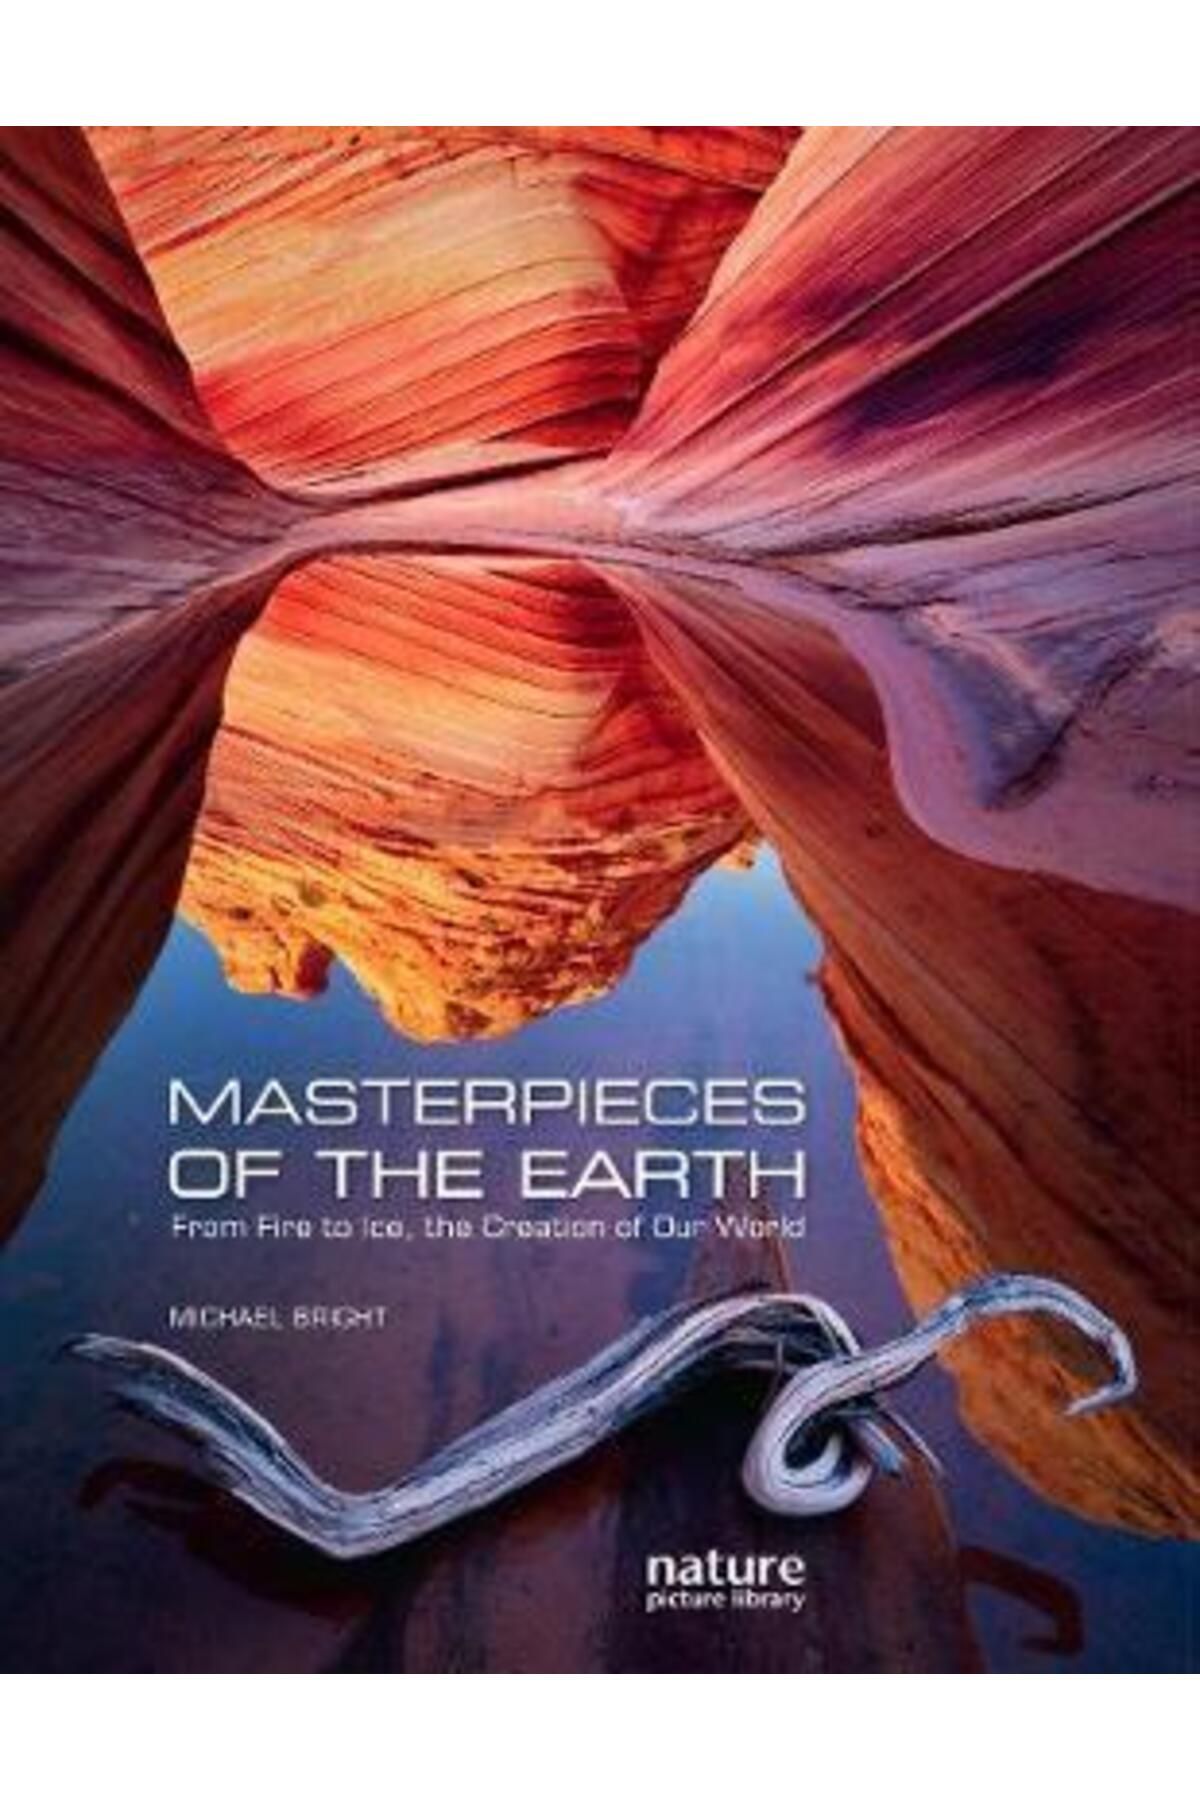 White Star Publisher Masterpieces Of The Earth